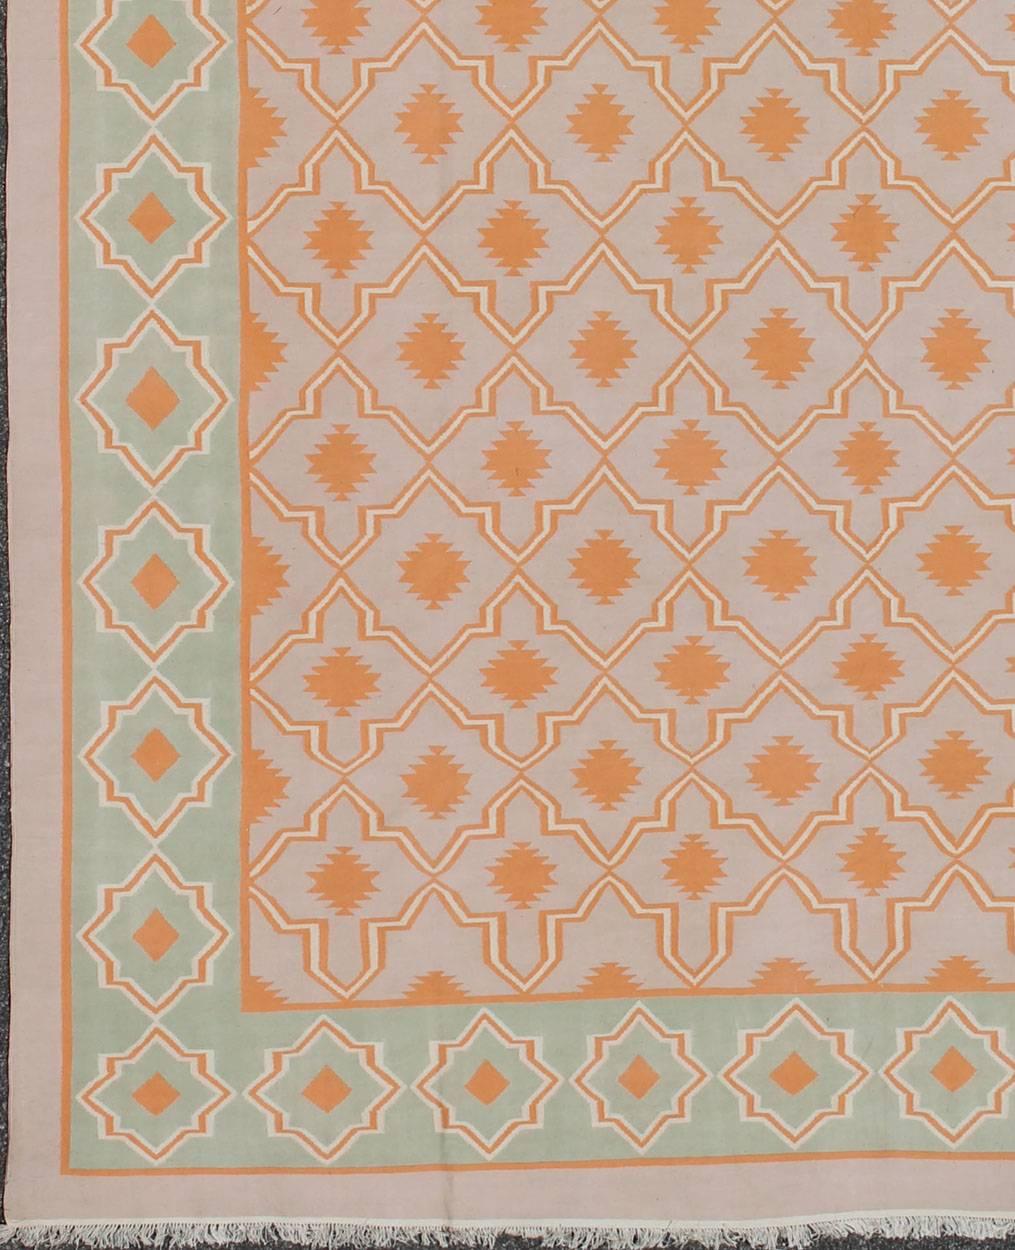 Woven during the mid-20th century, this designer, flat-woven Indian cotton dhurrie is decorated with a stepped diamond pattern and rendered with an inventive low-contrast color palette. The piece features repeating geometric motifs in a tasteful